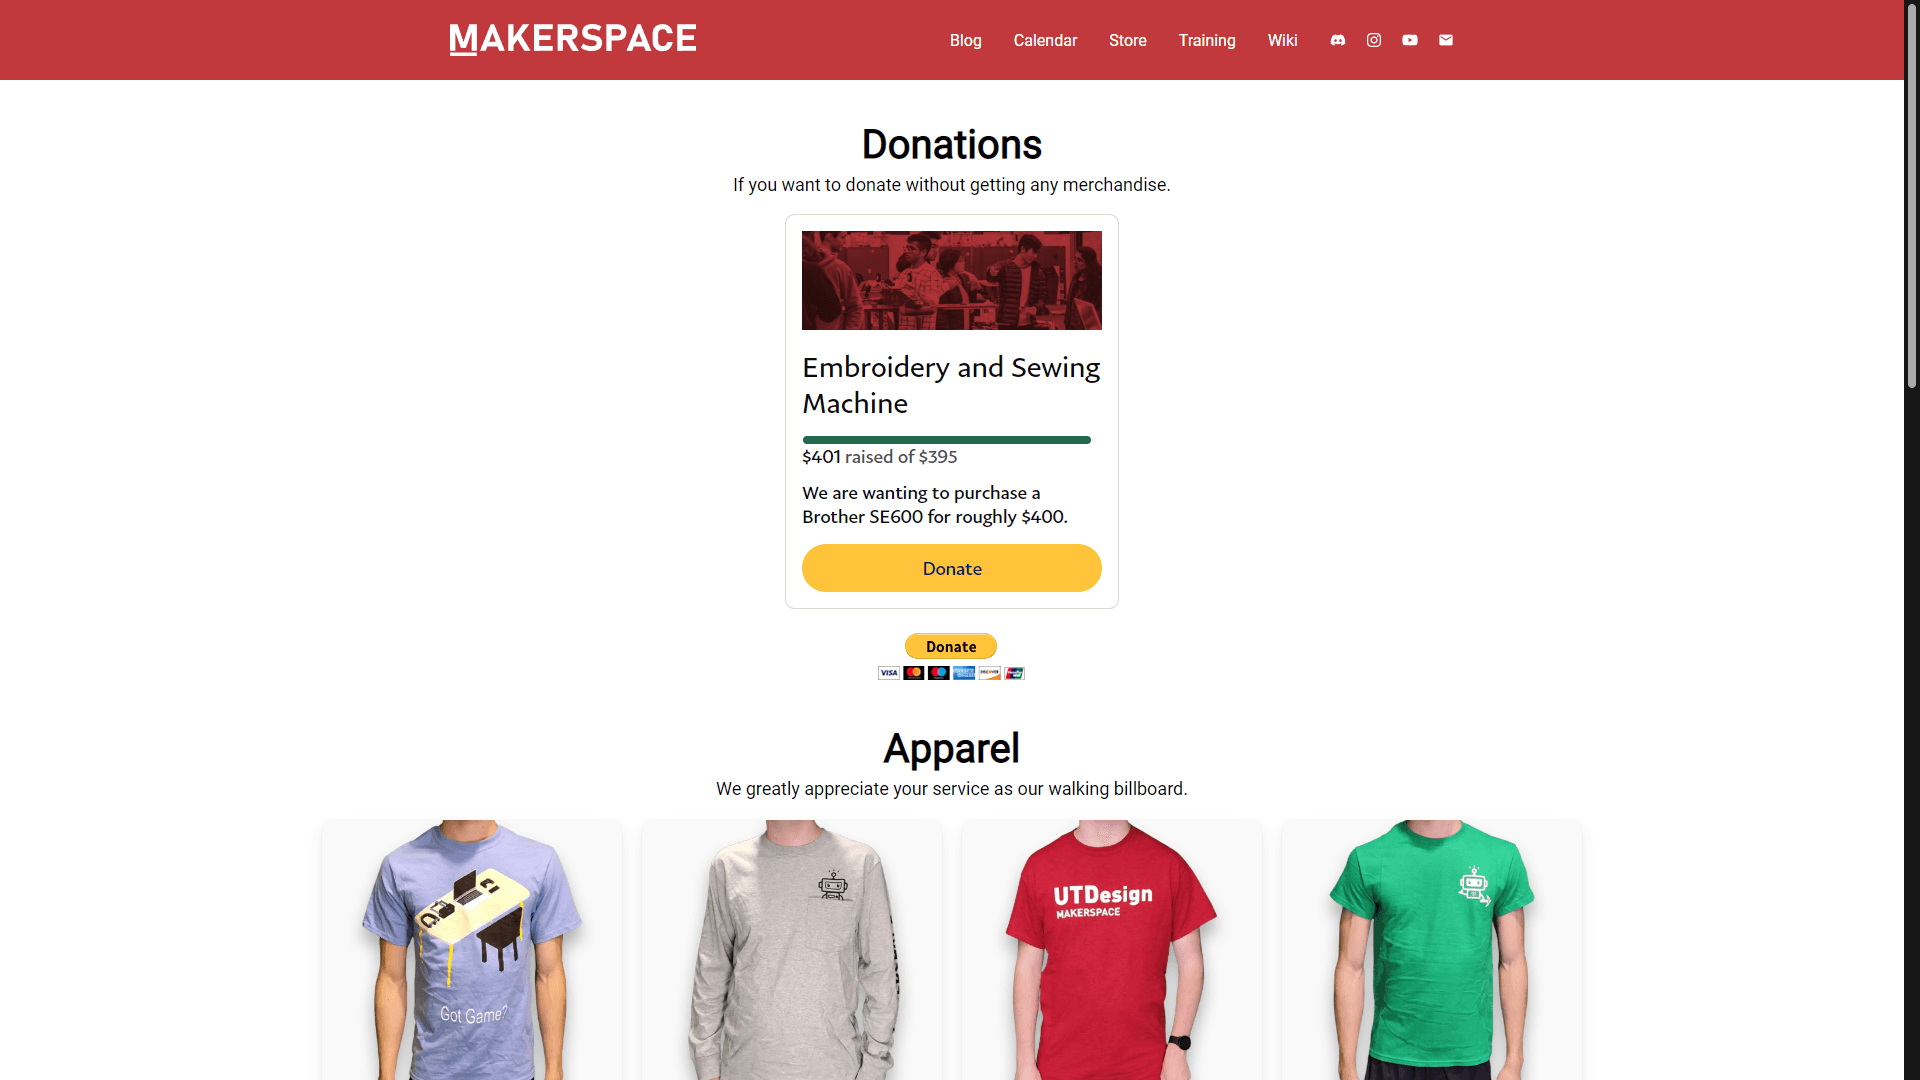 Store page with all available merchandise